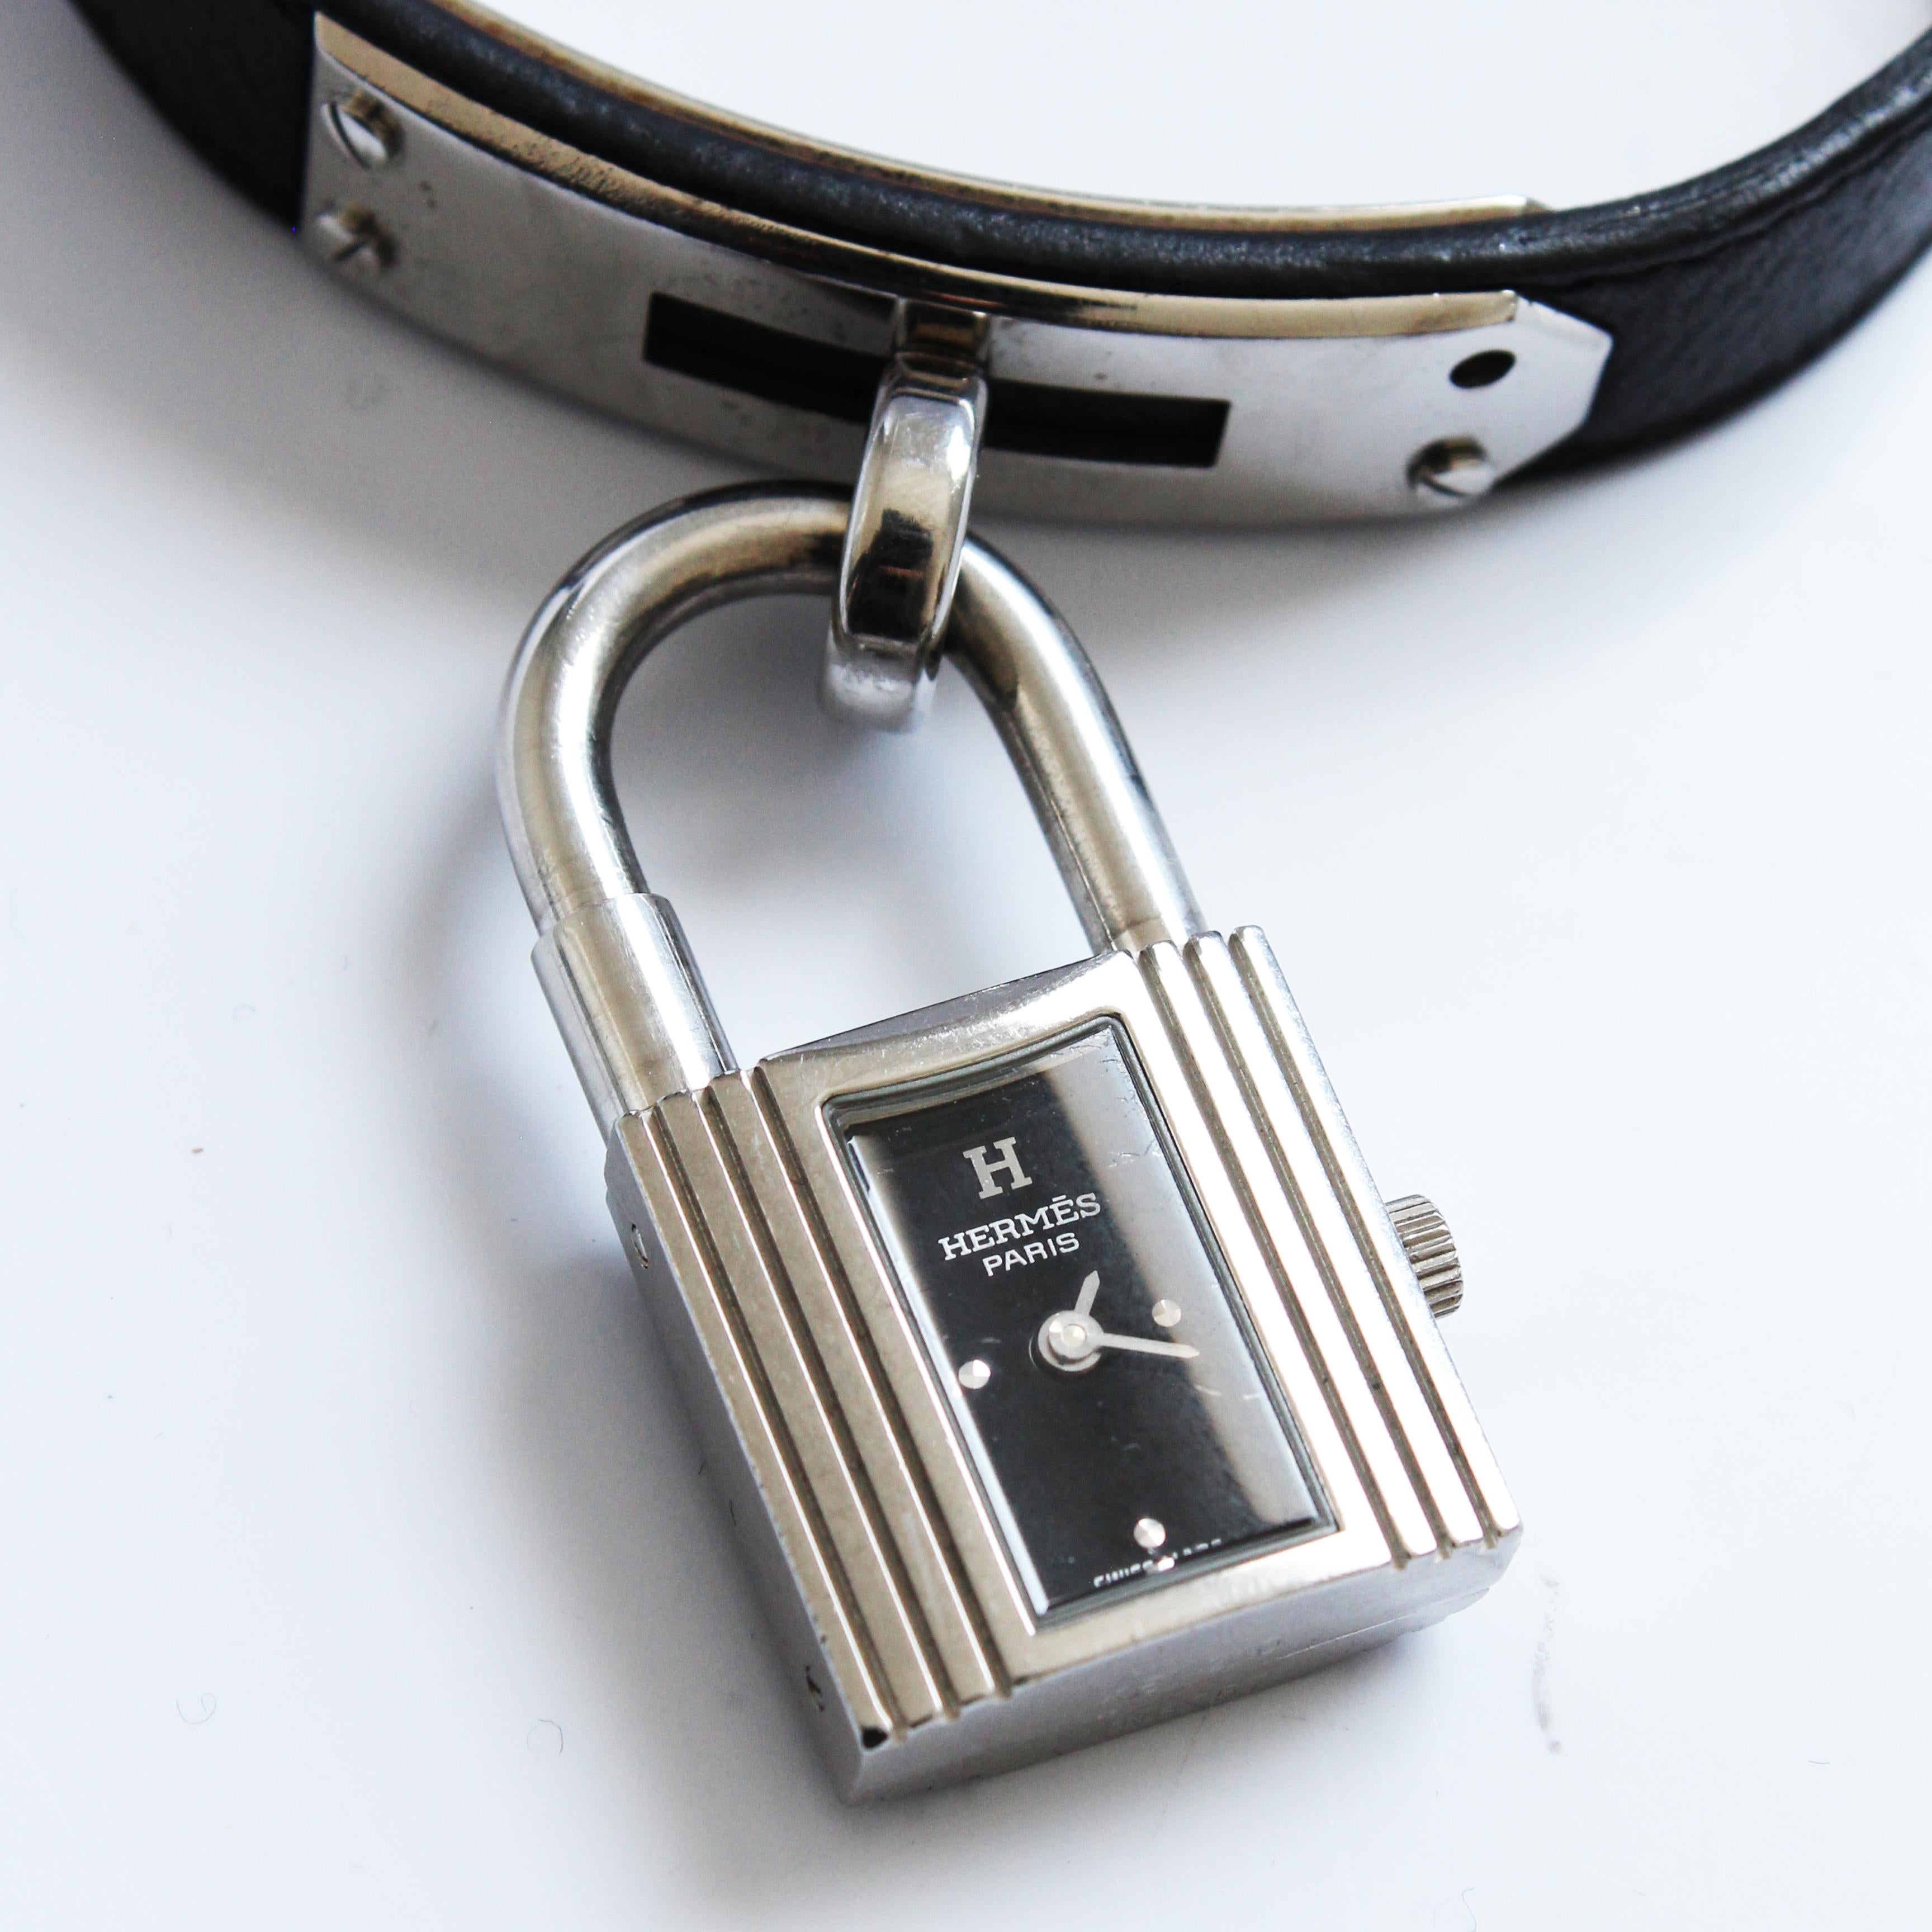 Hermes Kelly Watch Silver Cadena Lock Black Epsom Leather Strap 2004  In Good Condition For Sale In Port Saint Lucie, FL